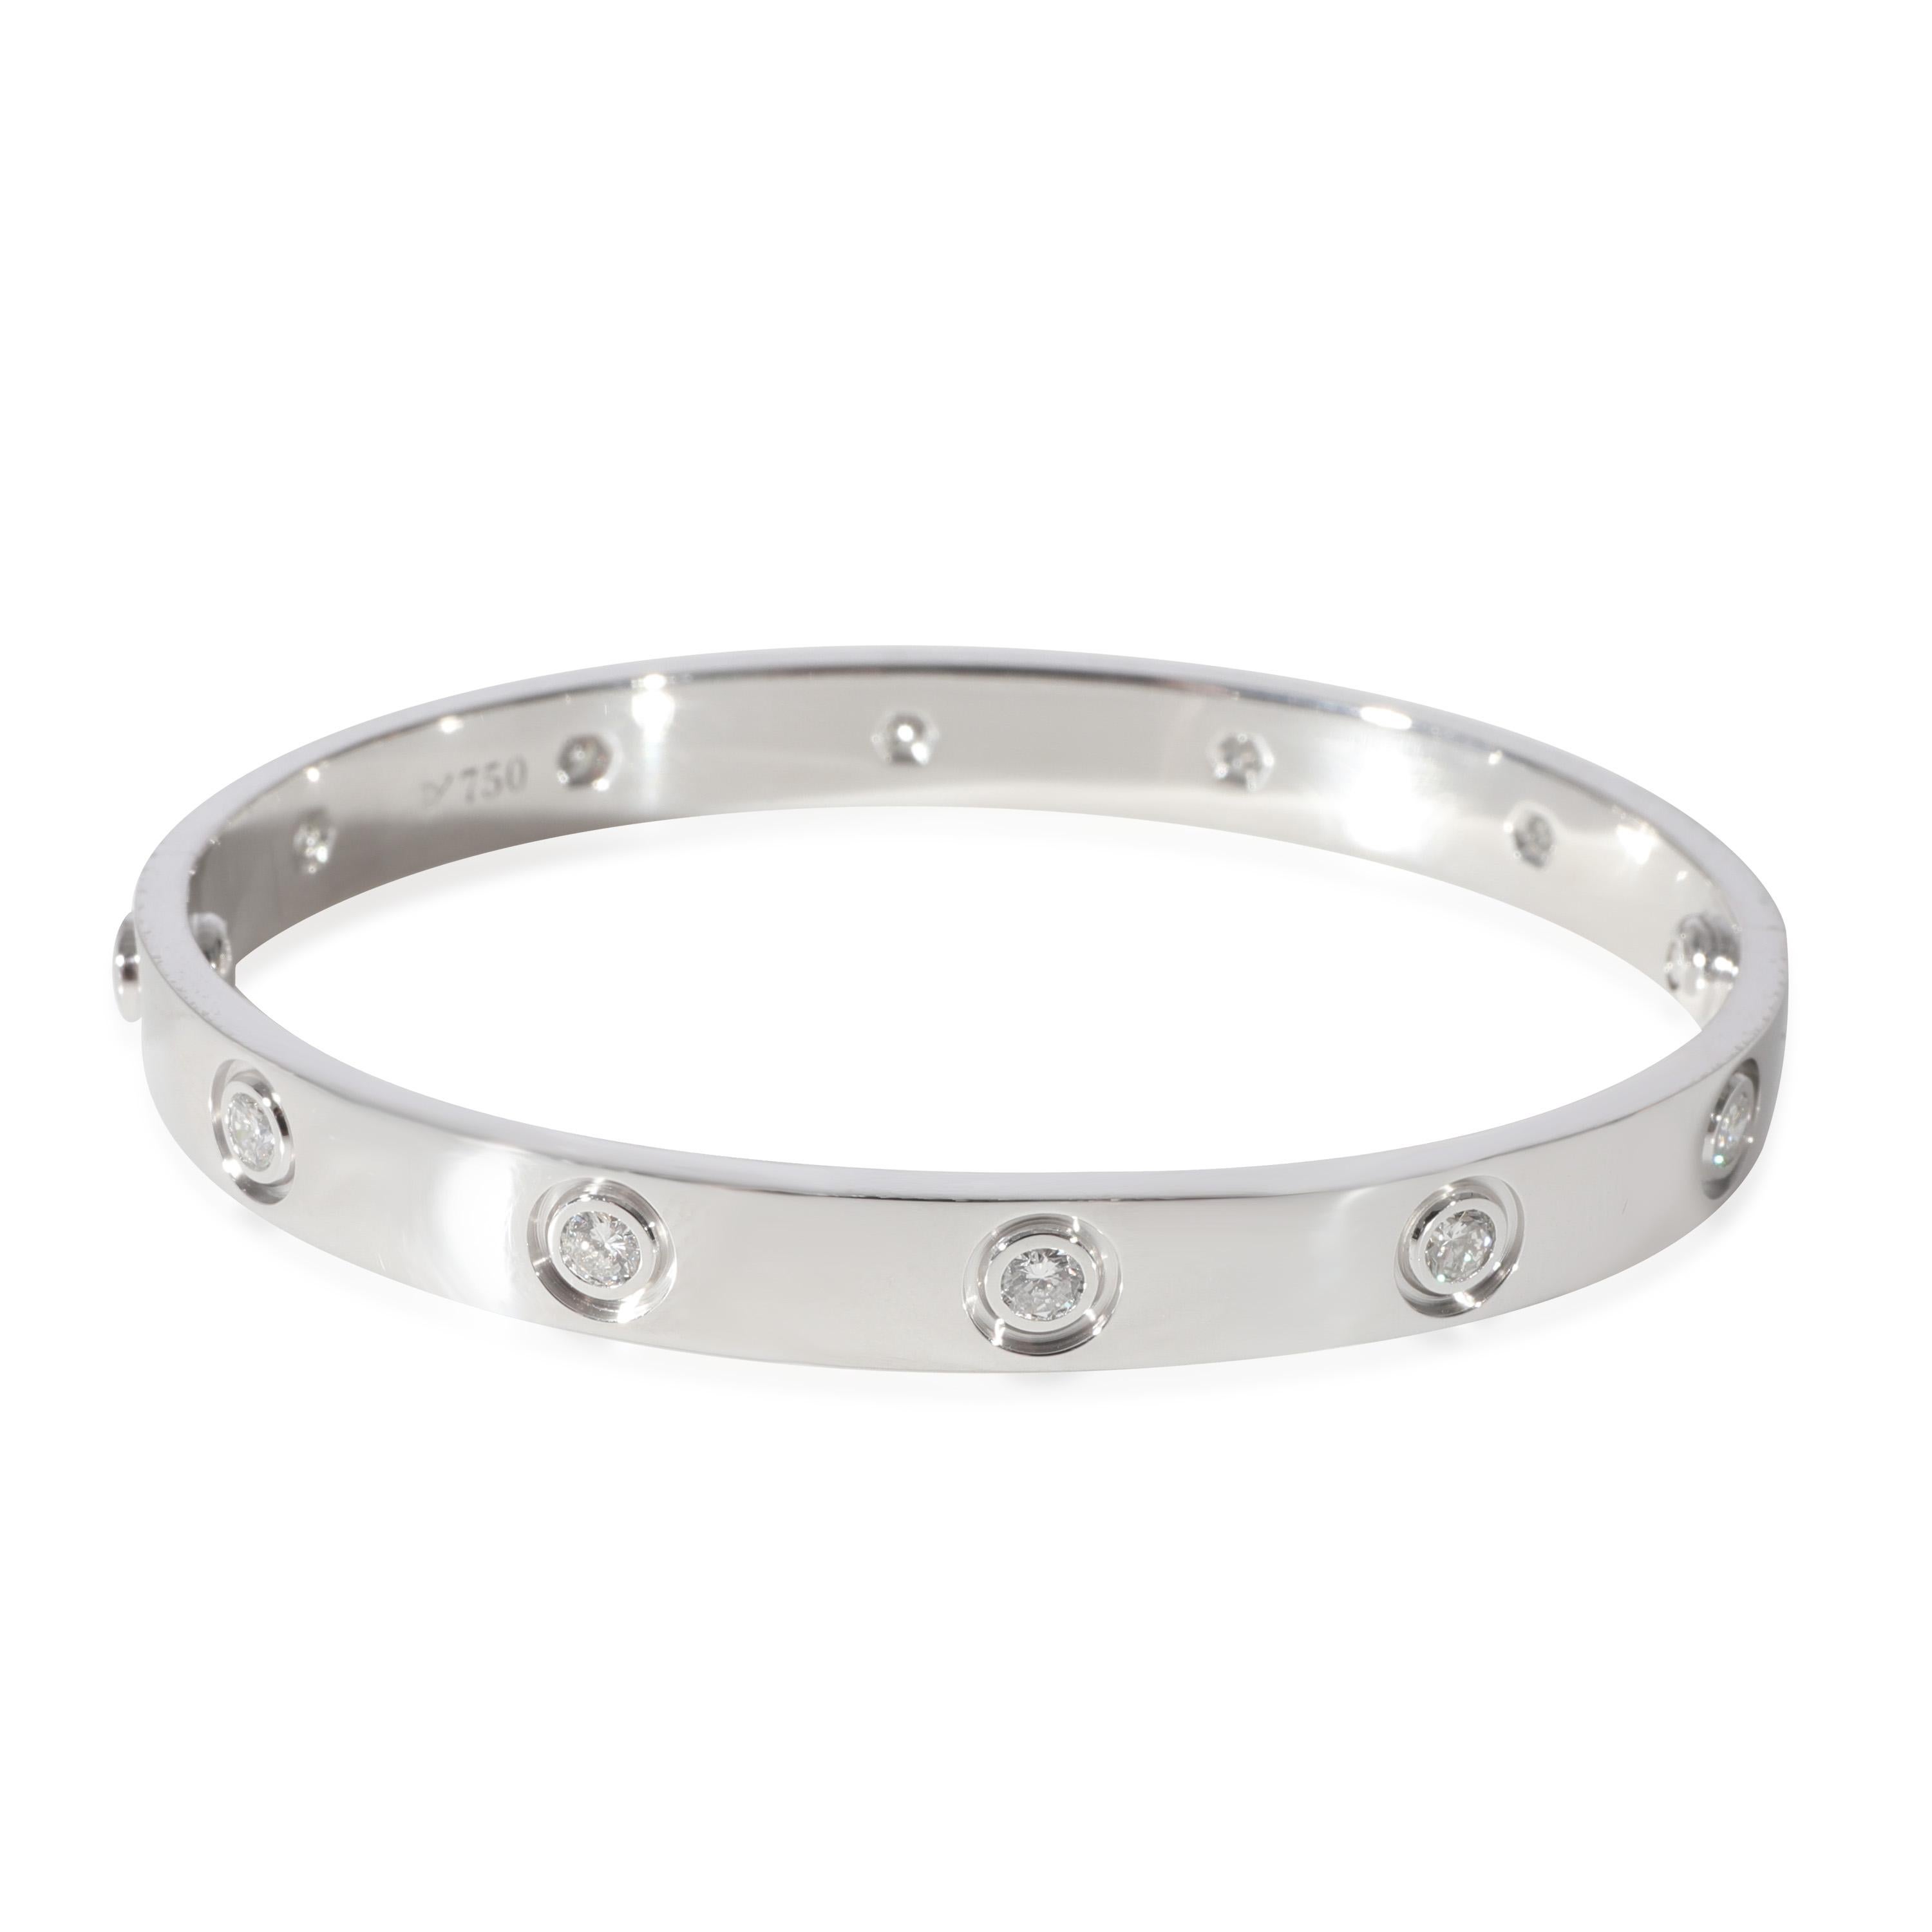 Cartier LOVE Diamond Bracelet in 18k 18 KT White Gold 0.96 CTW

PRIMARY DETAILS
SKU: 128207
Listing Title: Cartier LOVE Diamond Bracelet in 18k 18 KT White Gold 0.96 CTW
Condition Description: Retails for 17200 USD. In excellent condition and